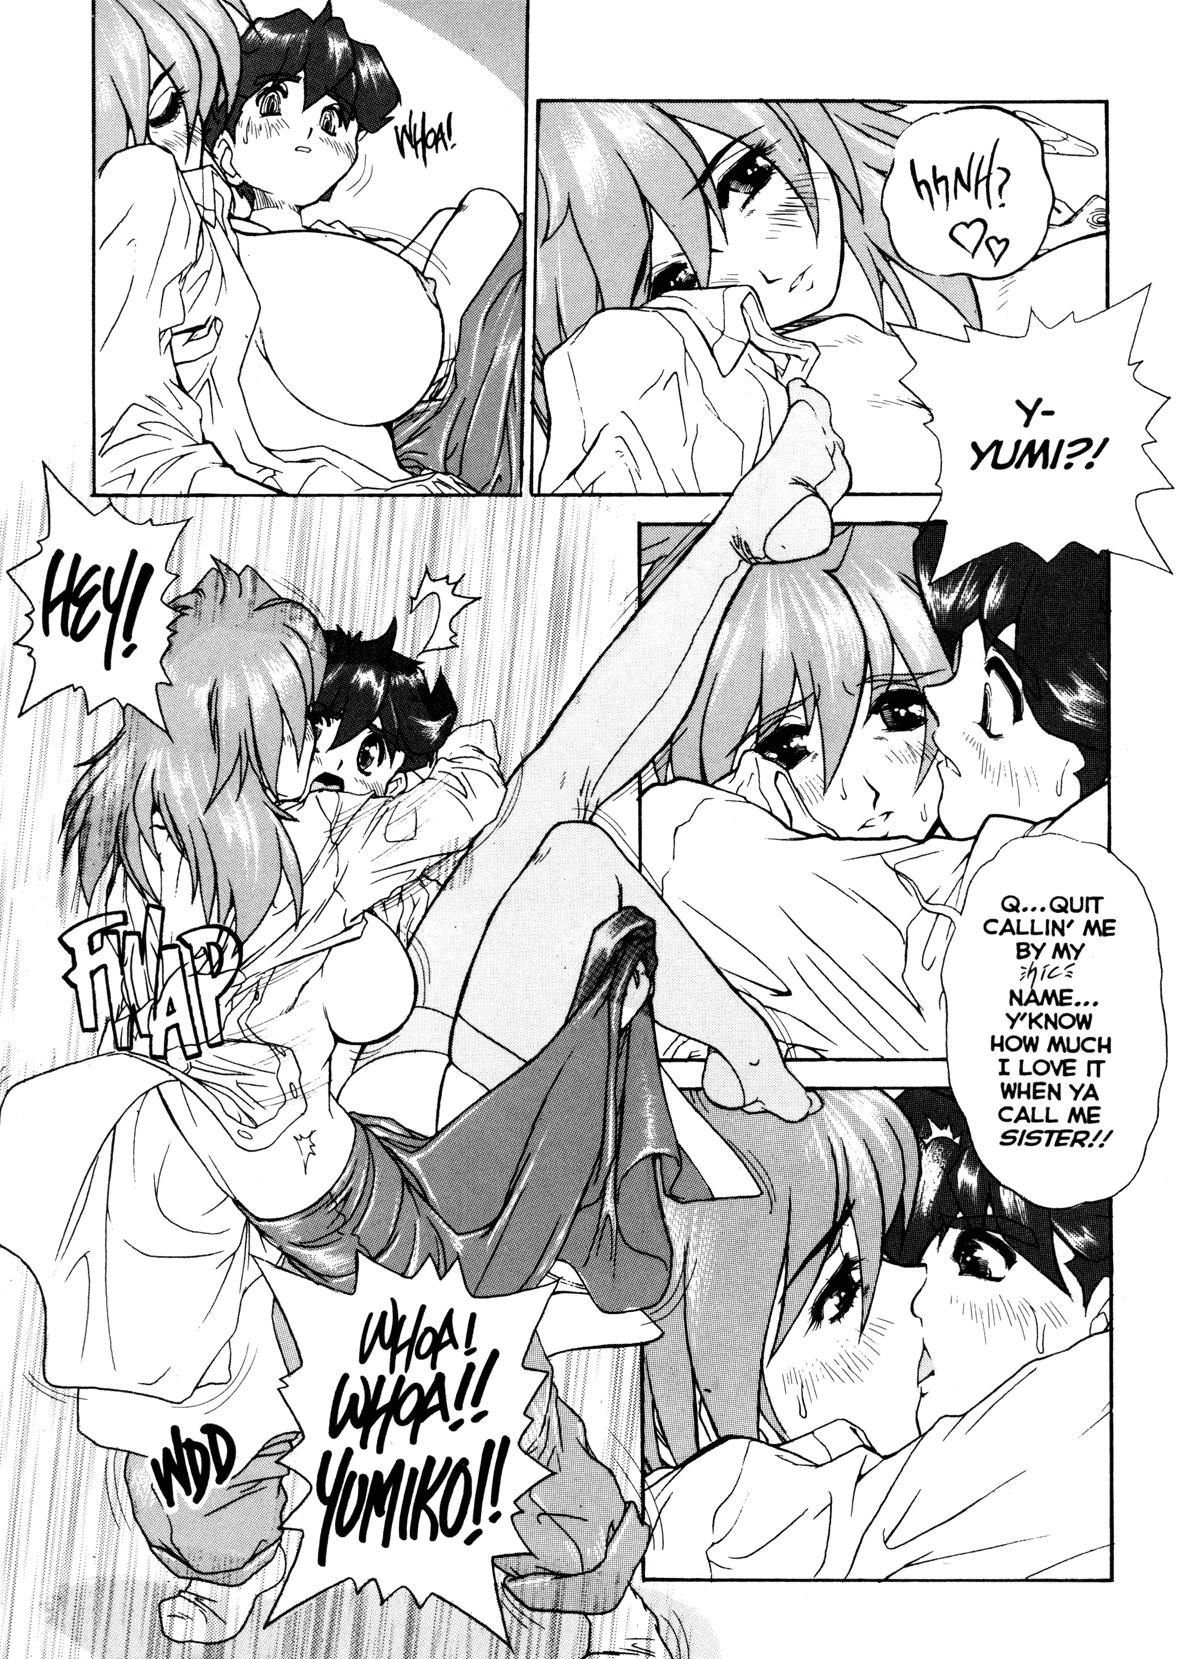 Best Blowjob Voice of Submission II - Gehenna 07 Matures - Page 8